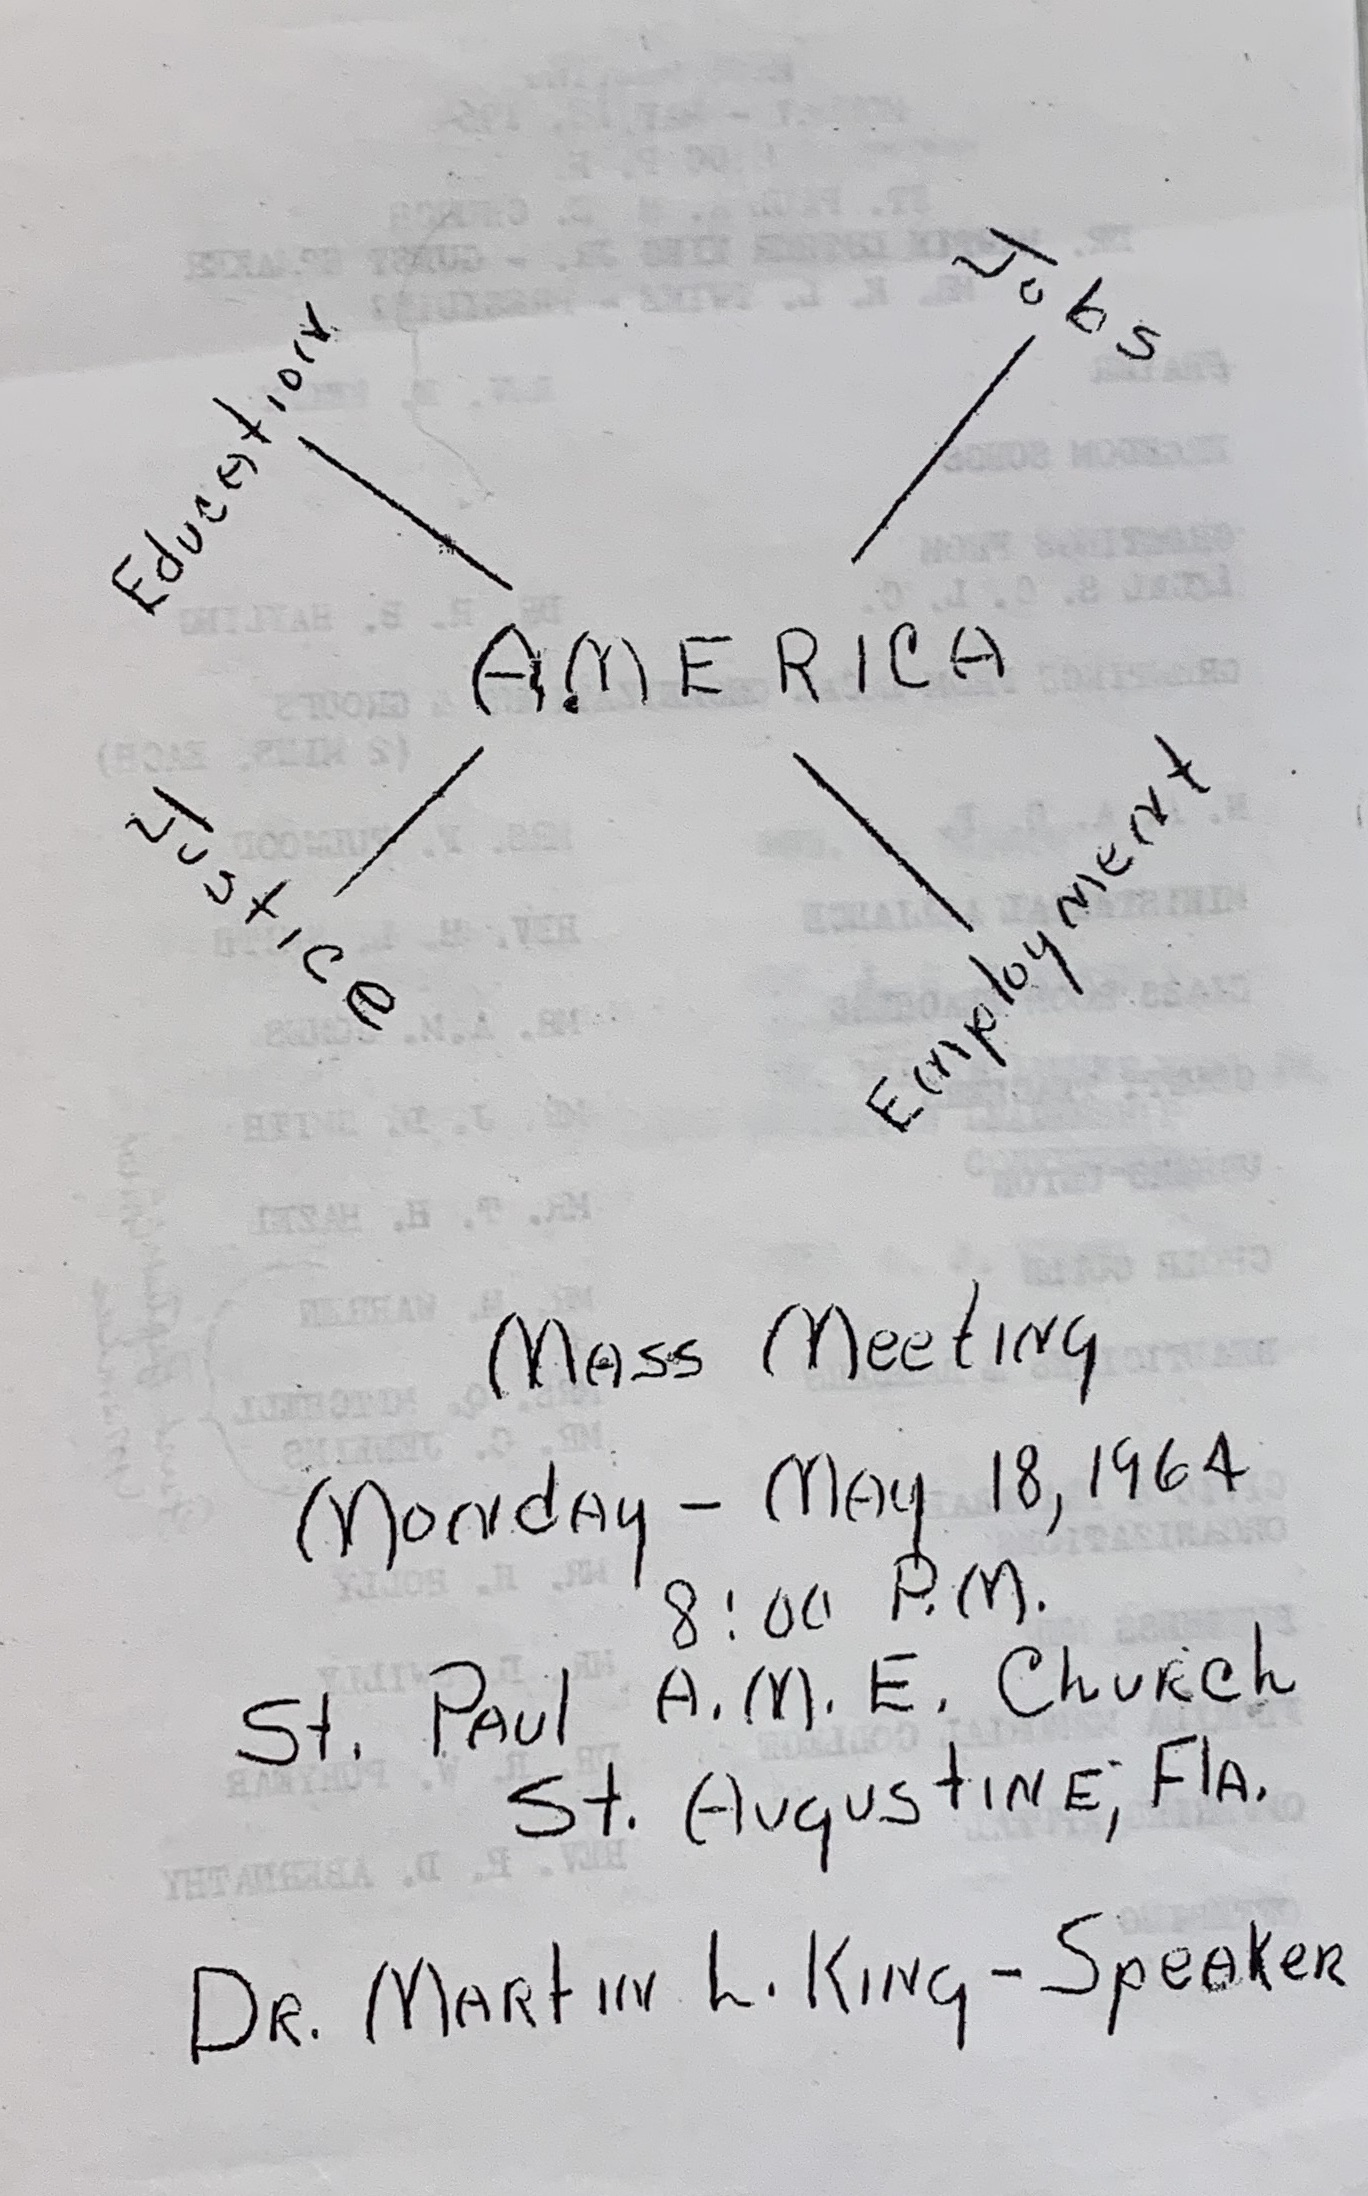 A handwritten flyer that advertises MLK speaking at St. Paul AME. At the top is a cosmogram of sorts in which AMERICA is in the center with diagonal lines connecting it to other words like 'Jobs' 'Education' 'Justice' and 'Employment' underneath it says Mass Meeting Monday- May 18, 1964 at 8:00pm St. Paul AME Church St. Augustine, Fla Dr. Martin L. King - Speaker